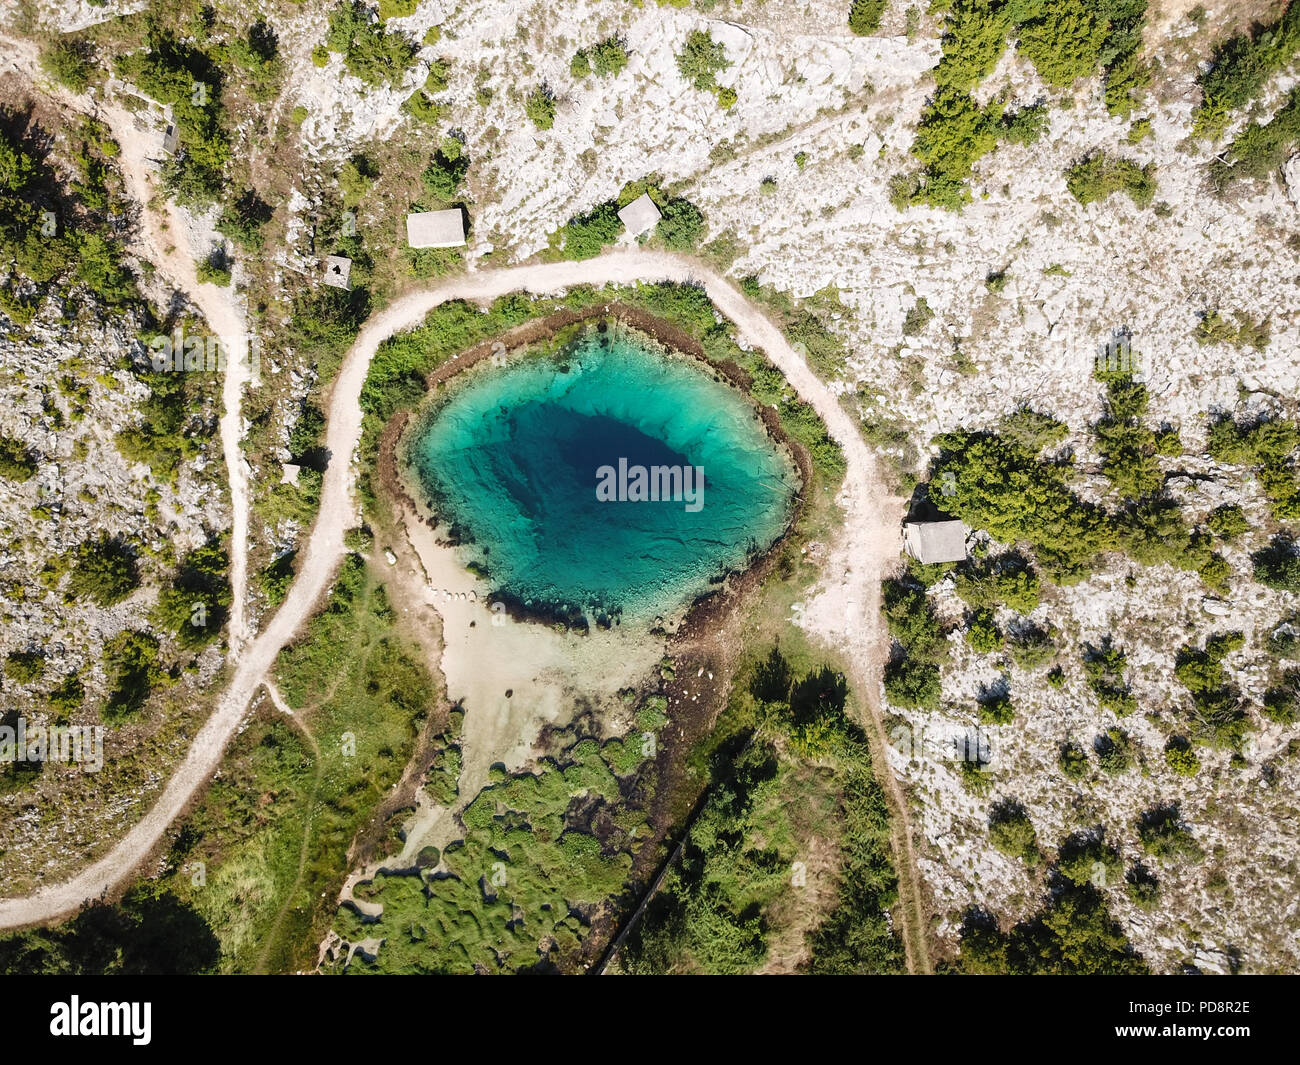 The spring of the Cetina River (izvor Cetine) in the foothills of the Dinara Mountain is named Blue Eye (Modro oko). Stock Photo